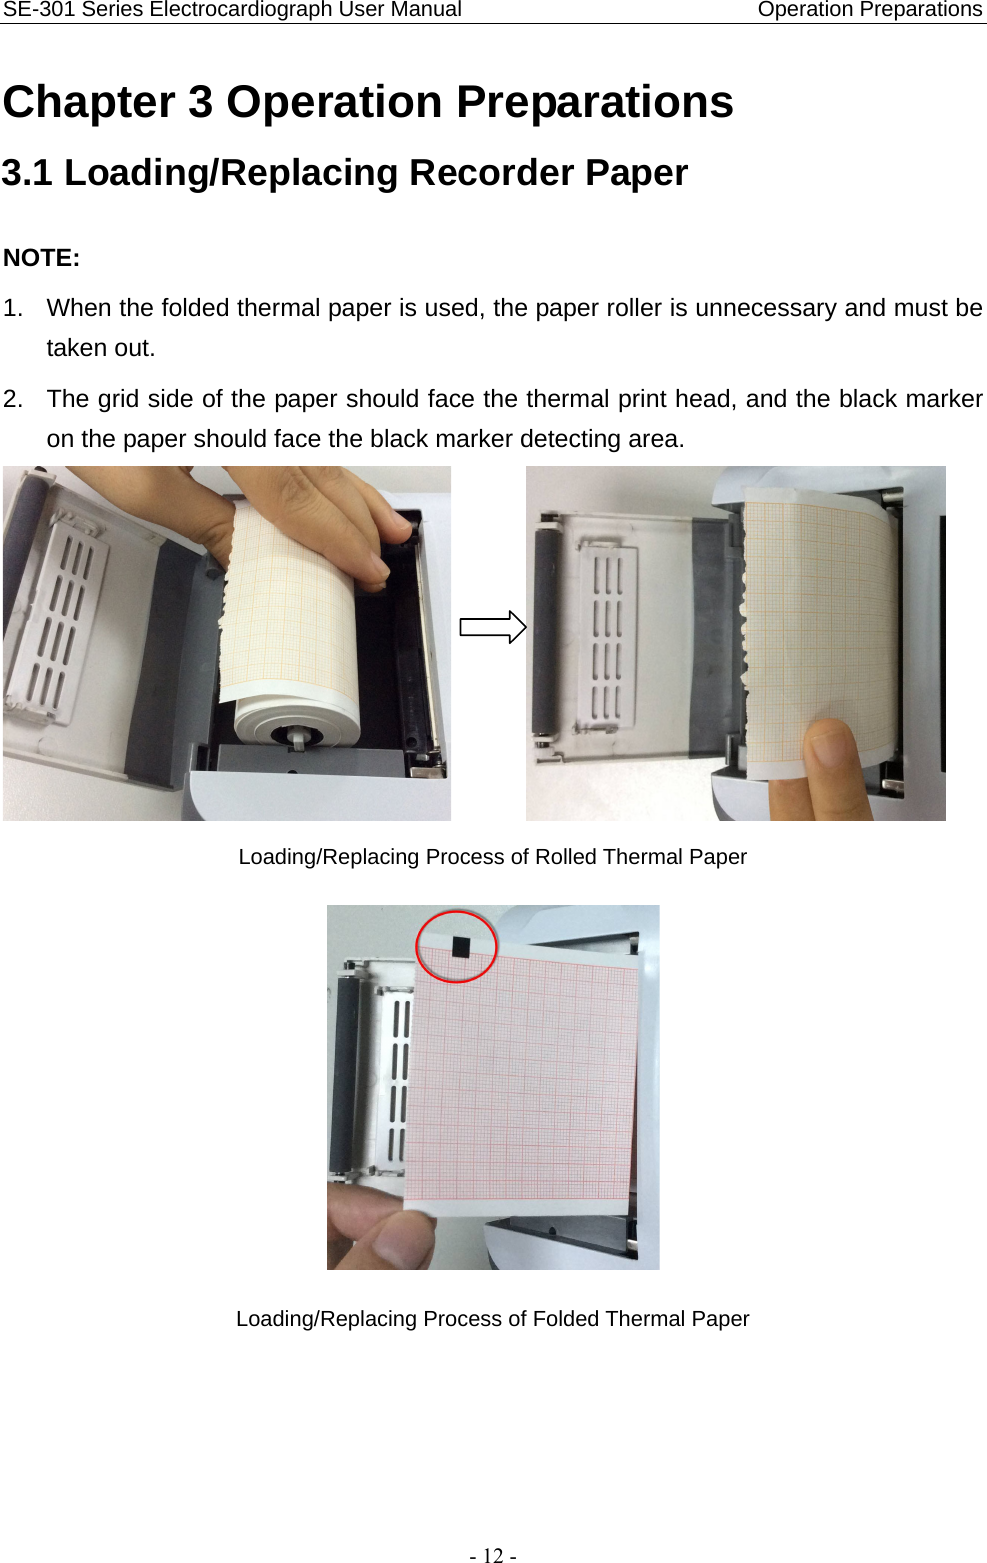 SE-301 Series Electrocardiograph User Manual                           Operation Preparations - 12 - Chapter 3 Operation Preparations 3.1 Loading/Replacing Recorder Paper NOTE:  1.  When the folded thermal paper is used, the paper roller is unnecessary and must be taken out. 2.  The grid side of the paper should face the thermal print head, and the black marker on the paper should face the black marker detecting area.         Loading/Replacing Process of Rolled Thermal Paper  Loading/Replacing Process of Folded Thermal Paper 